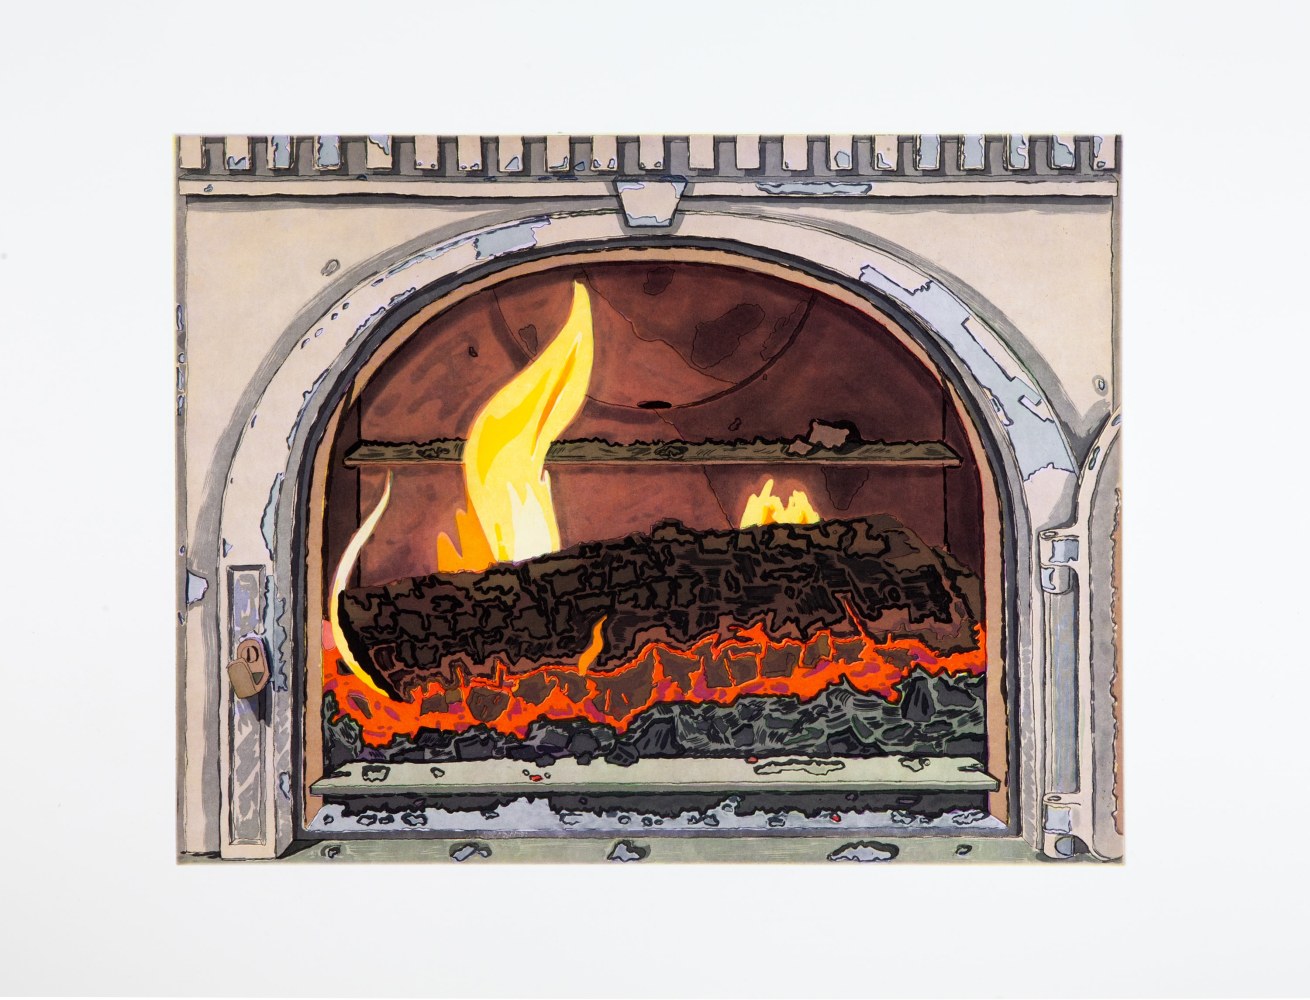 Fire
Josephine Halvorson, 2019

Five plate aquatint etching with dry point, soft ground, spit bite and sugar lift on white Somerset Satin paper
Signed, dated and numbered by the artist on recto
Plate size: 18&amp;quot; x 22&amp;quot;
Paper size: 25.5&amp;quot; x 29&amp;quot;
Edition of 20
$2,500

Ppublished and printed by Wingate Studio

INQUIRE